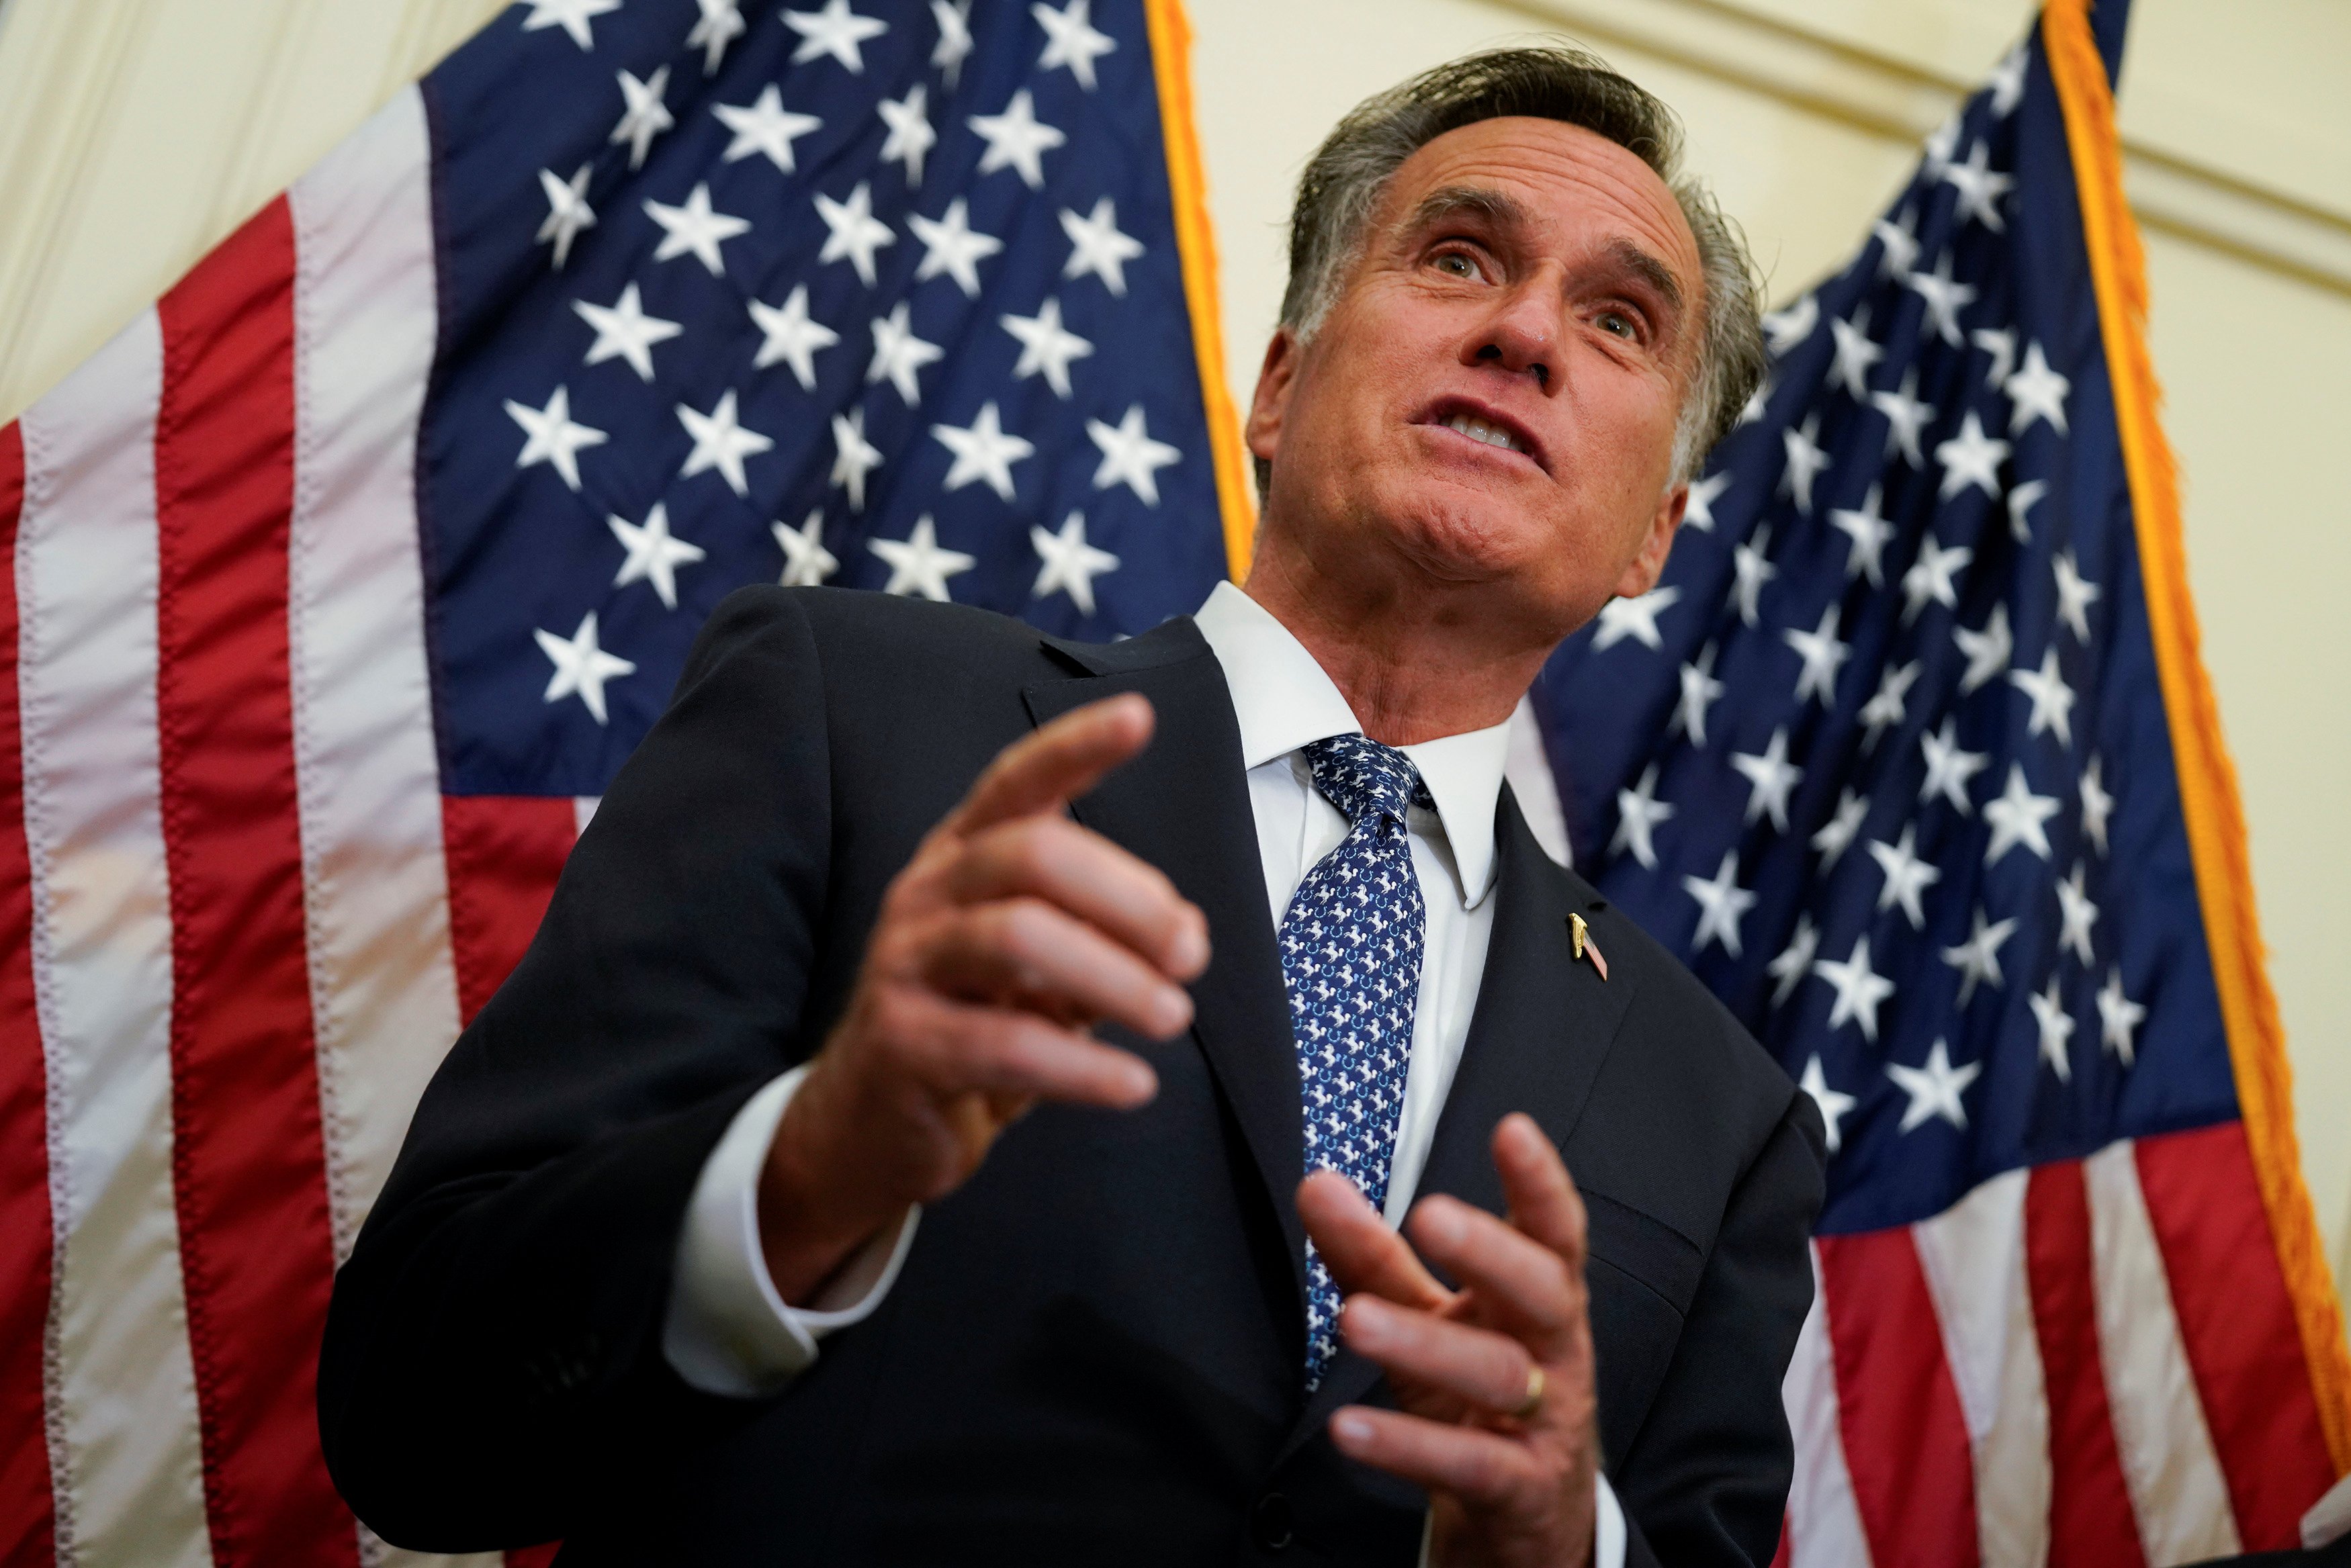 U.S. Senator Mitt Romney (R-UT) speaks at a news conference about the Tobacco to 21 Act, which would raise the minimum age to buy tobacco products and e-cigarettes to 21, on Capitol Hill